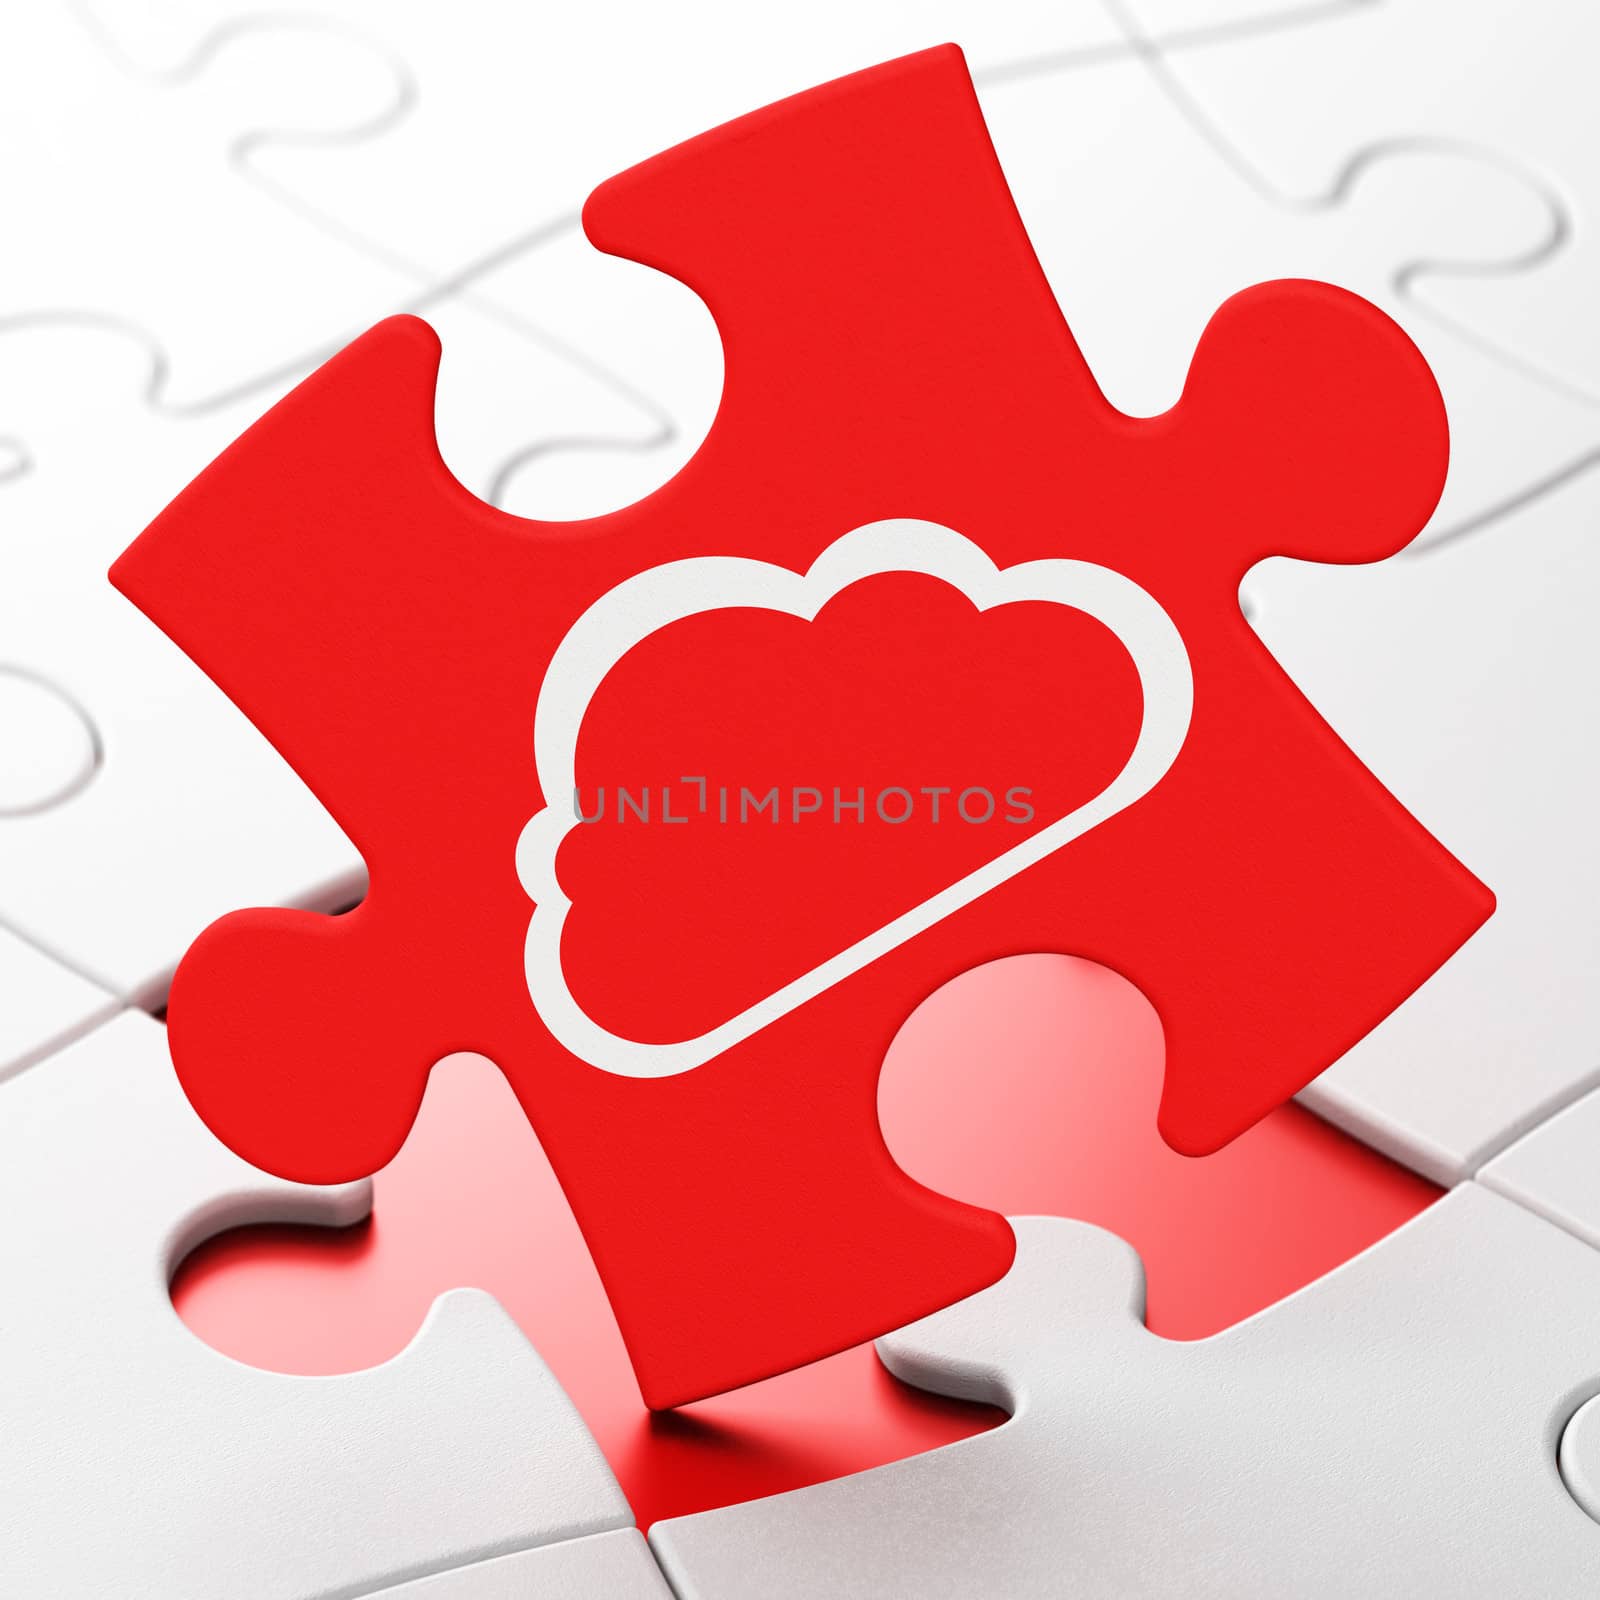 Cloud networking concept: Cloud on puzzle background by maxkabakov